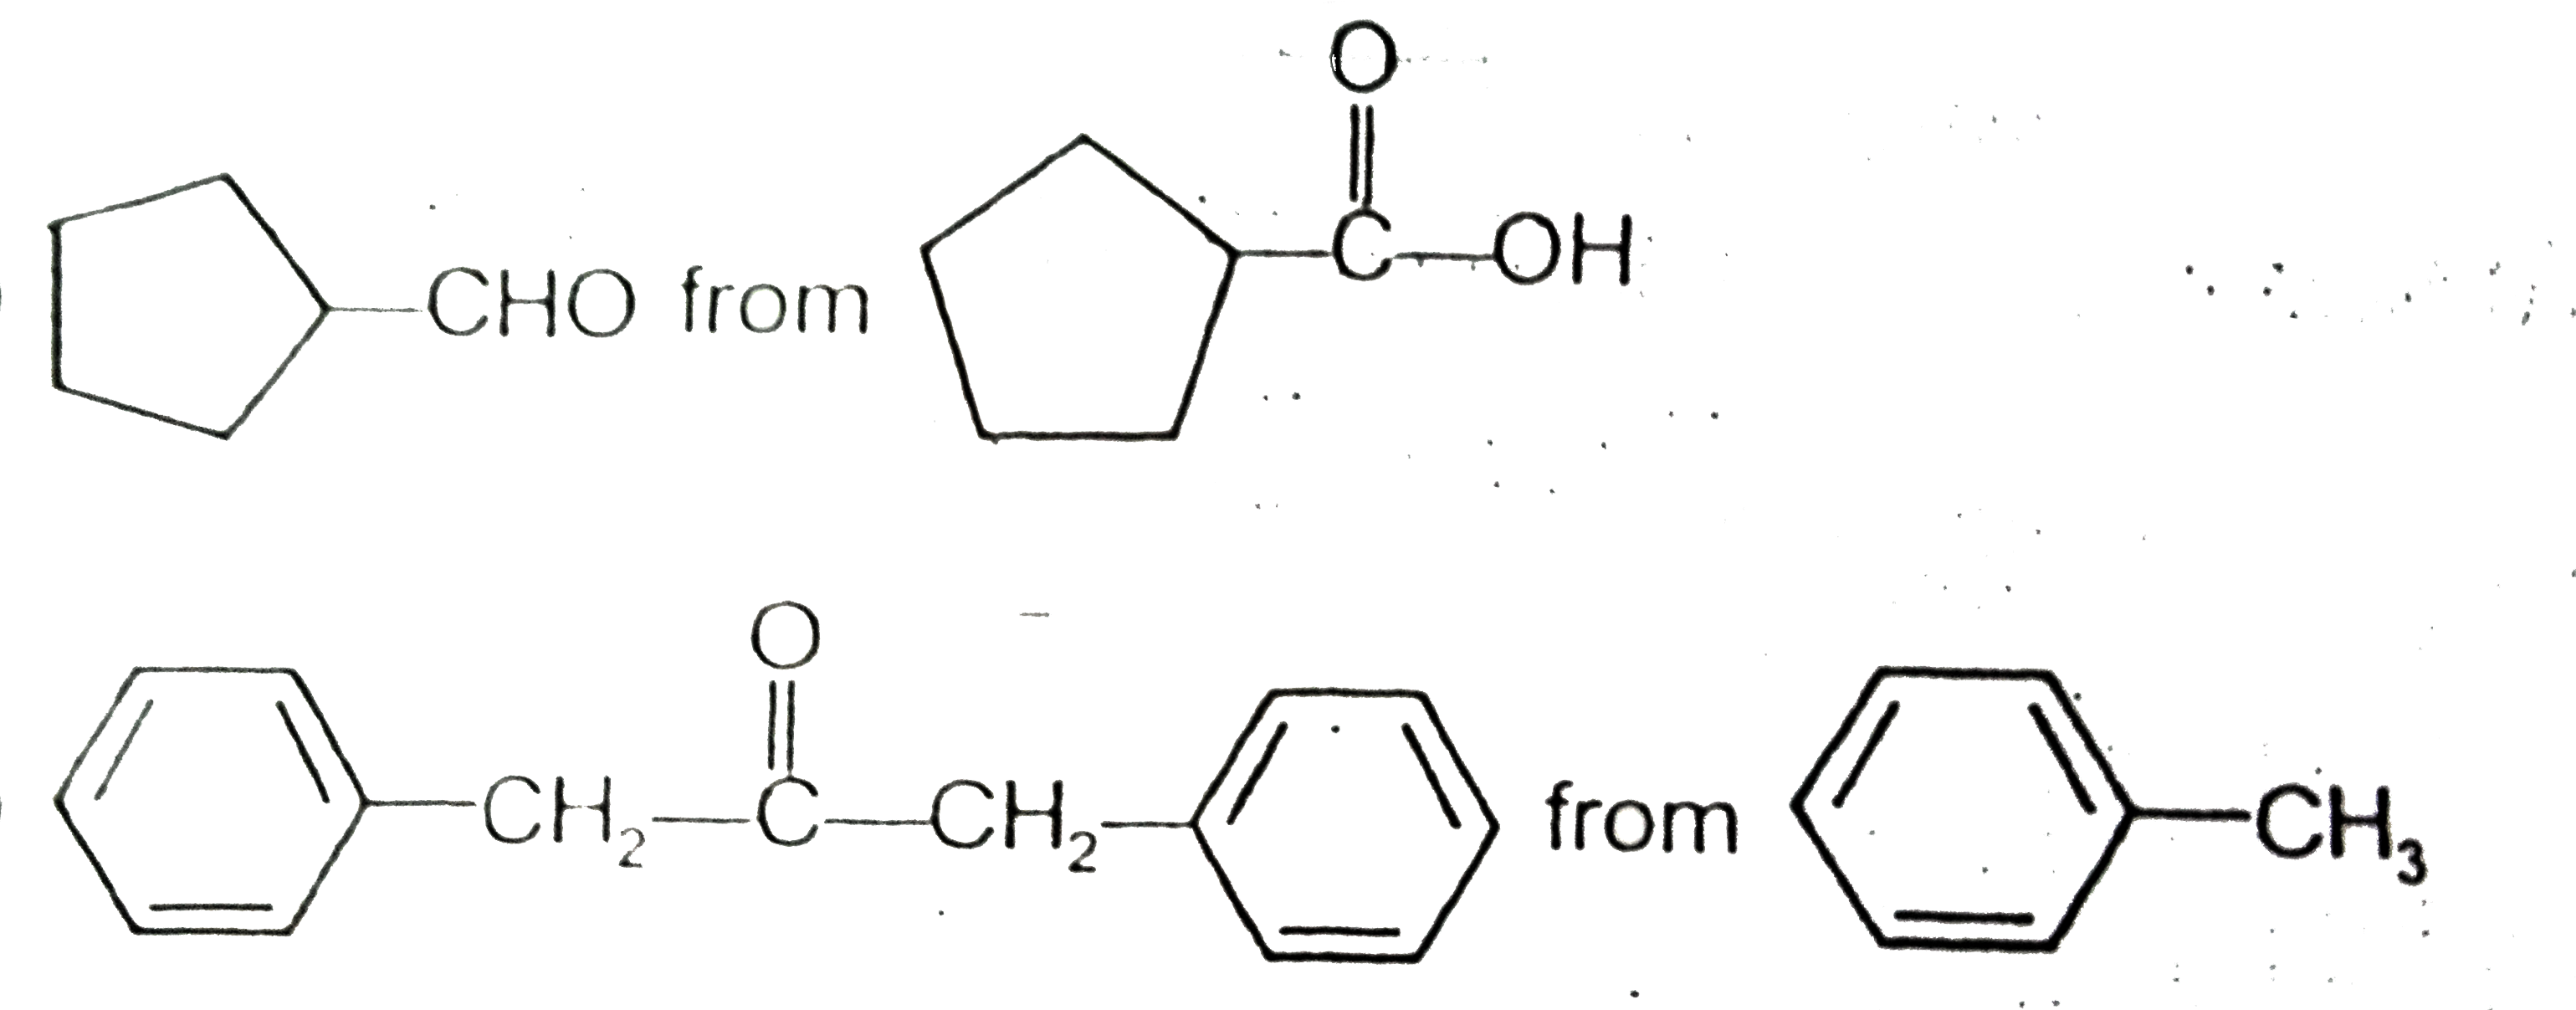 Propose a synthesis of each of the following compounds from the indicated starting materials (s) and any other necessary reagents.